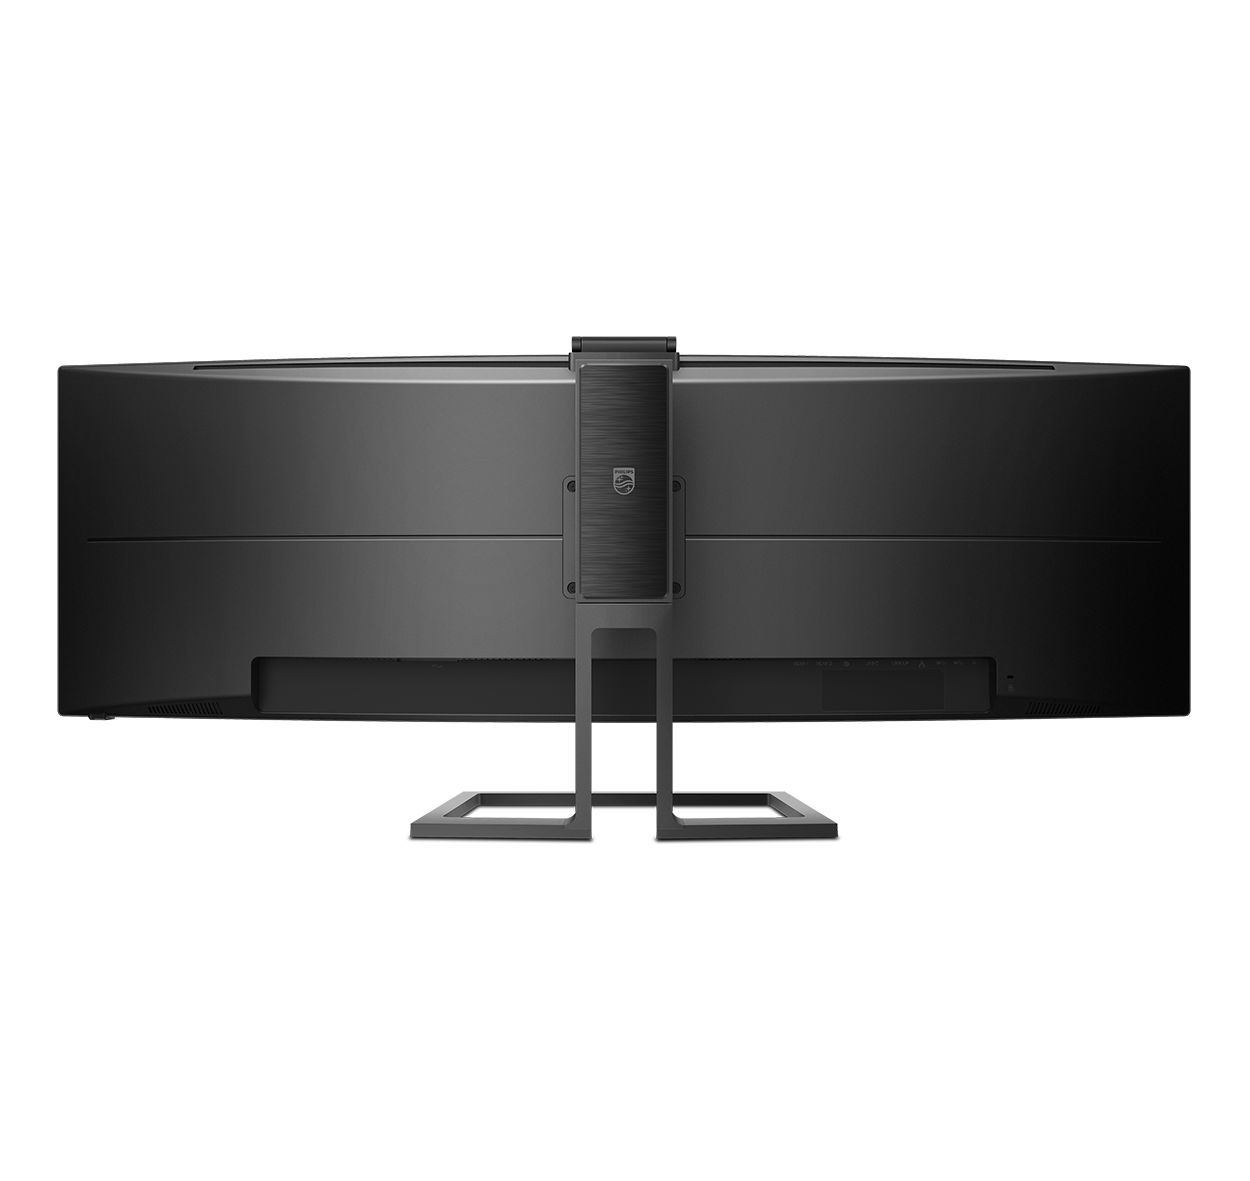 Monitor Curved SuperWide-LCD-Display im Format 32:9 499P9H/00 